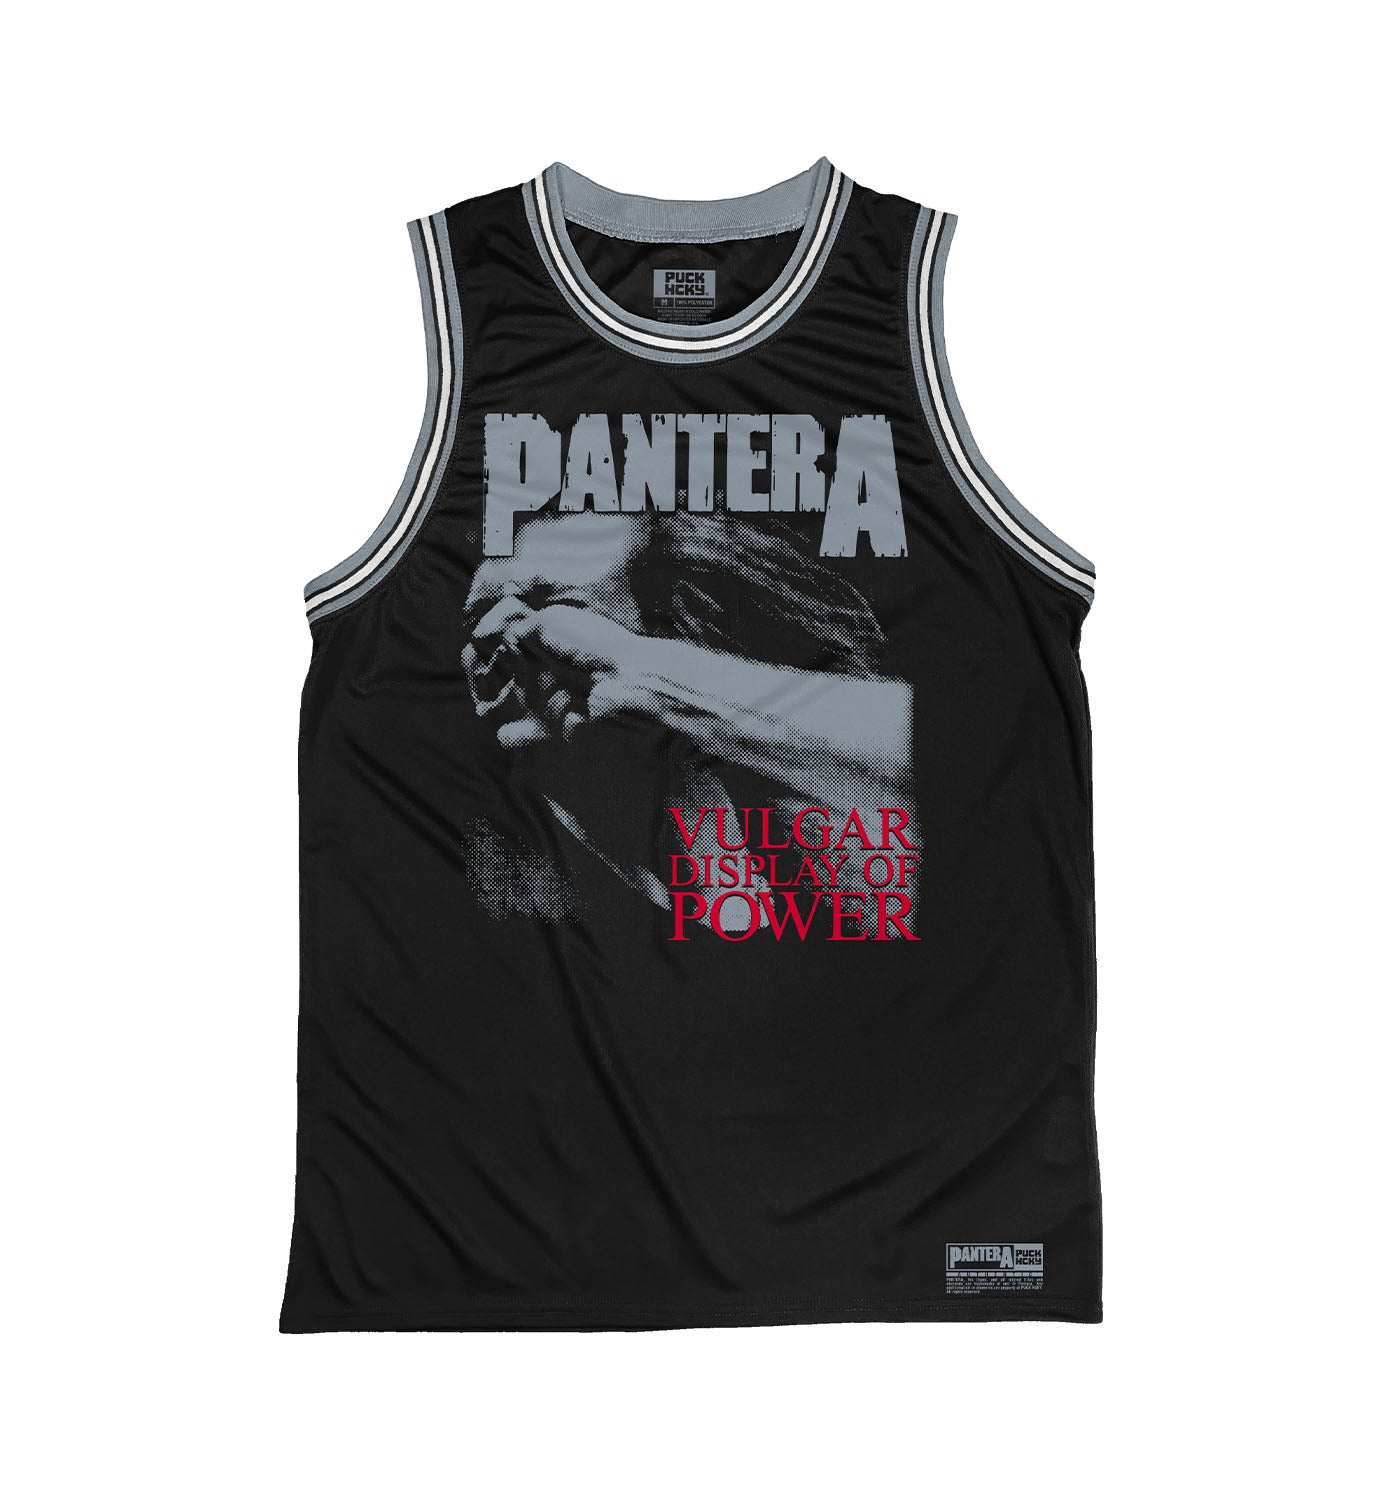 PANTERA 'A VULGAR DISPLAY' sleeveless summer league jersey in black, grey, and white front view